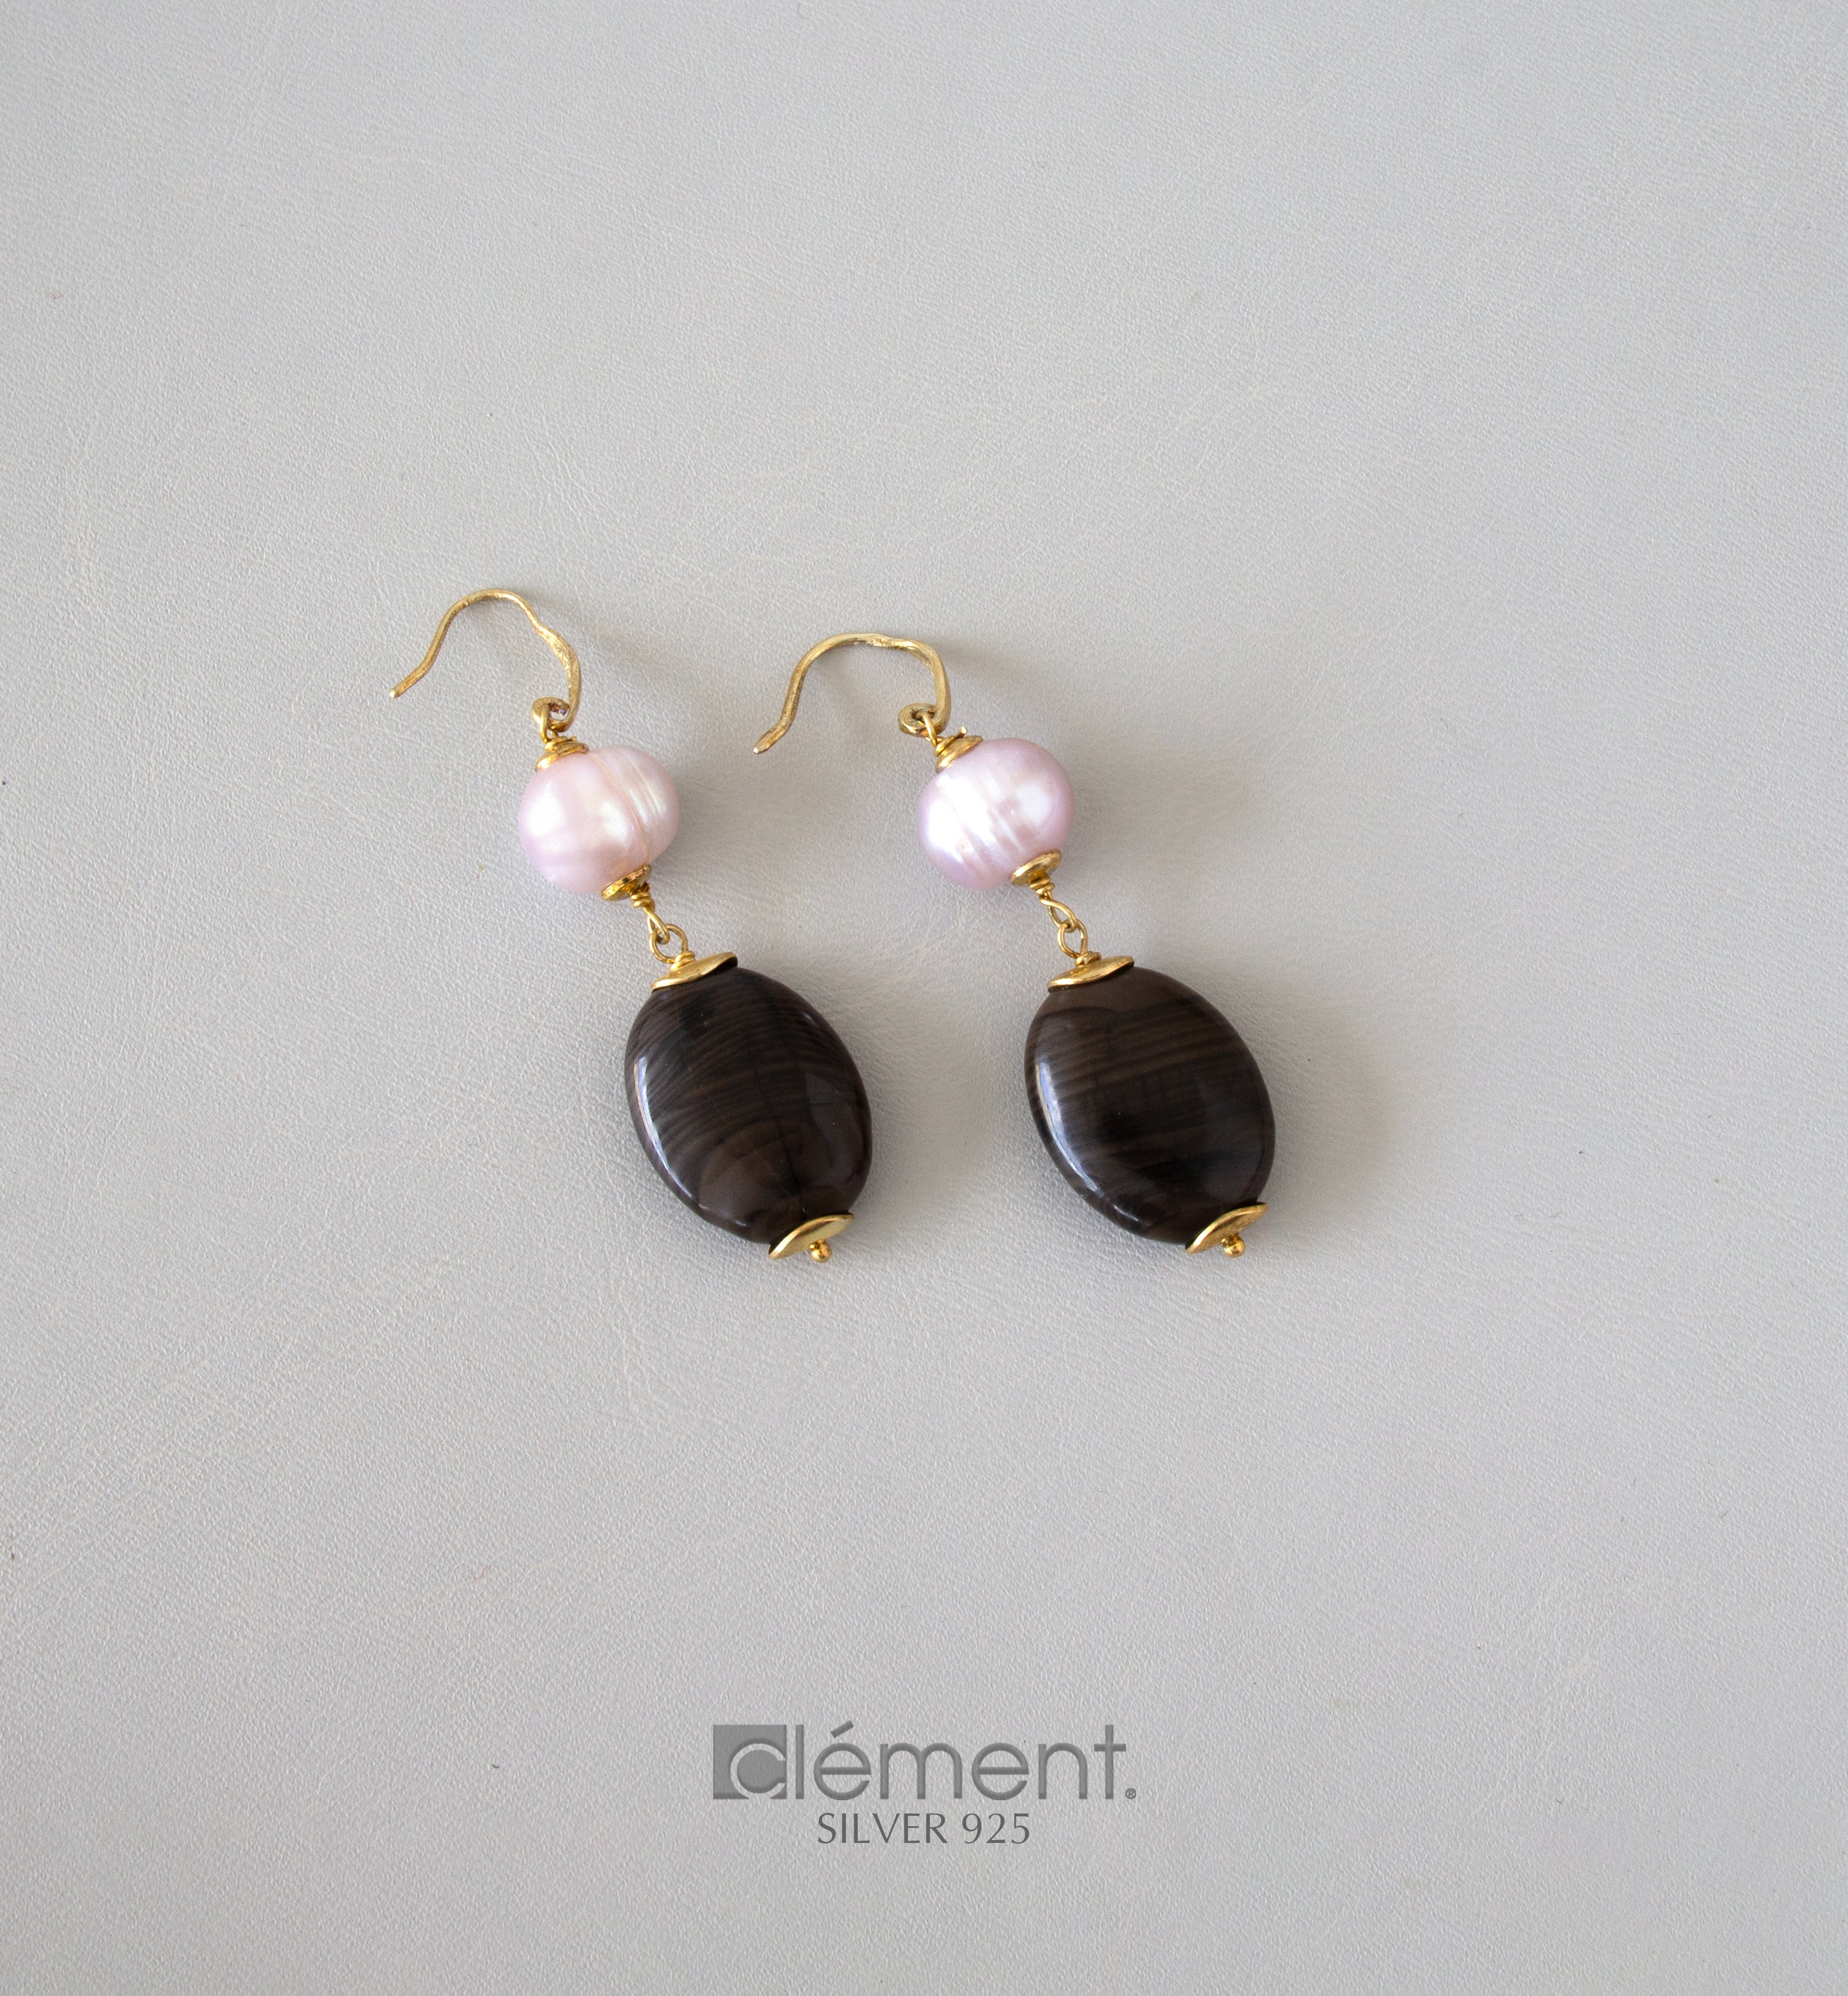 Silver 925 Earrings with Semi-Precious Stones and Pearls